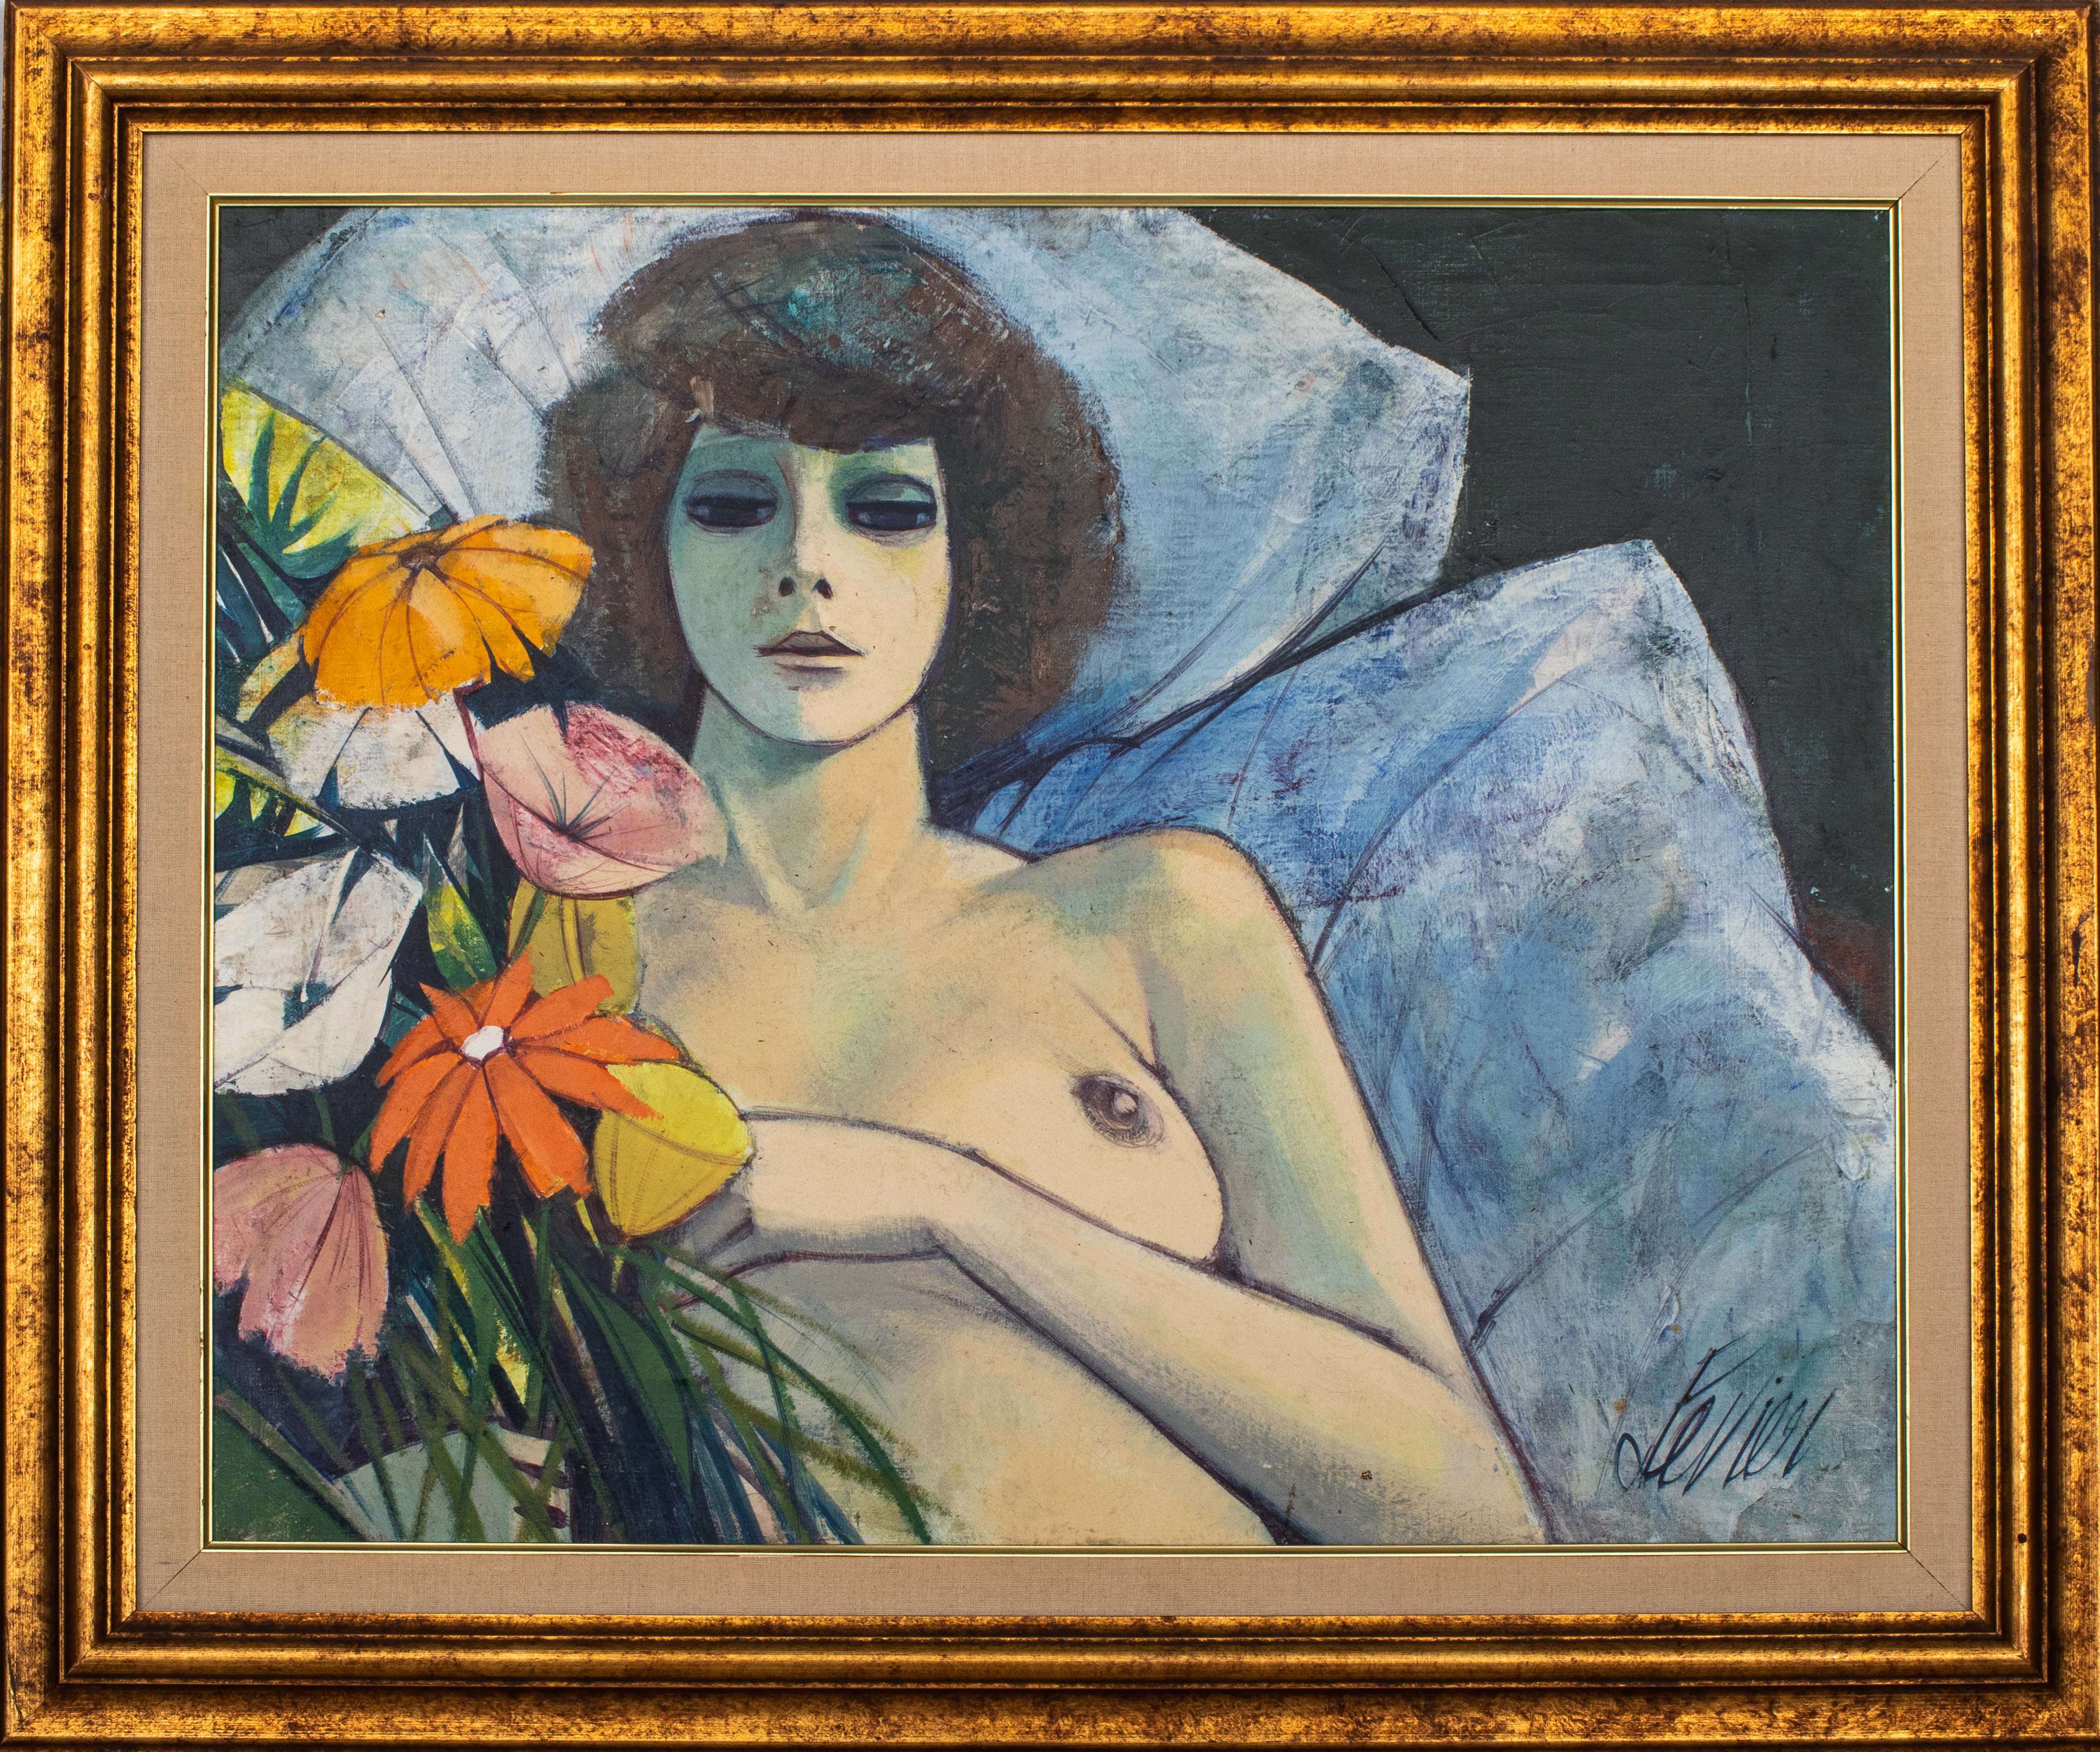 CHARLES LEVIER 'NUDE WITH FLOWERS'